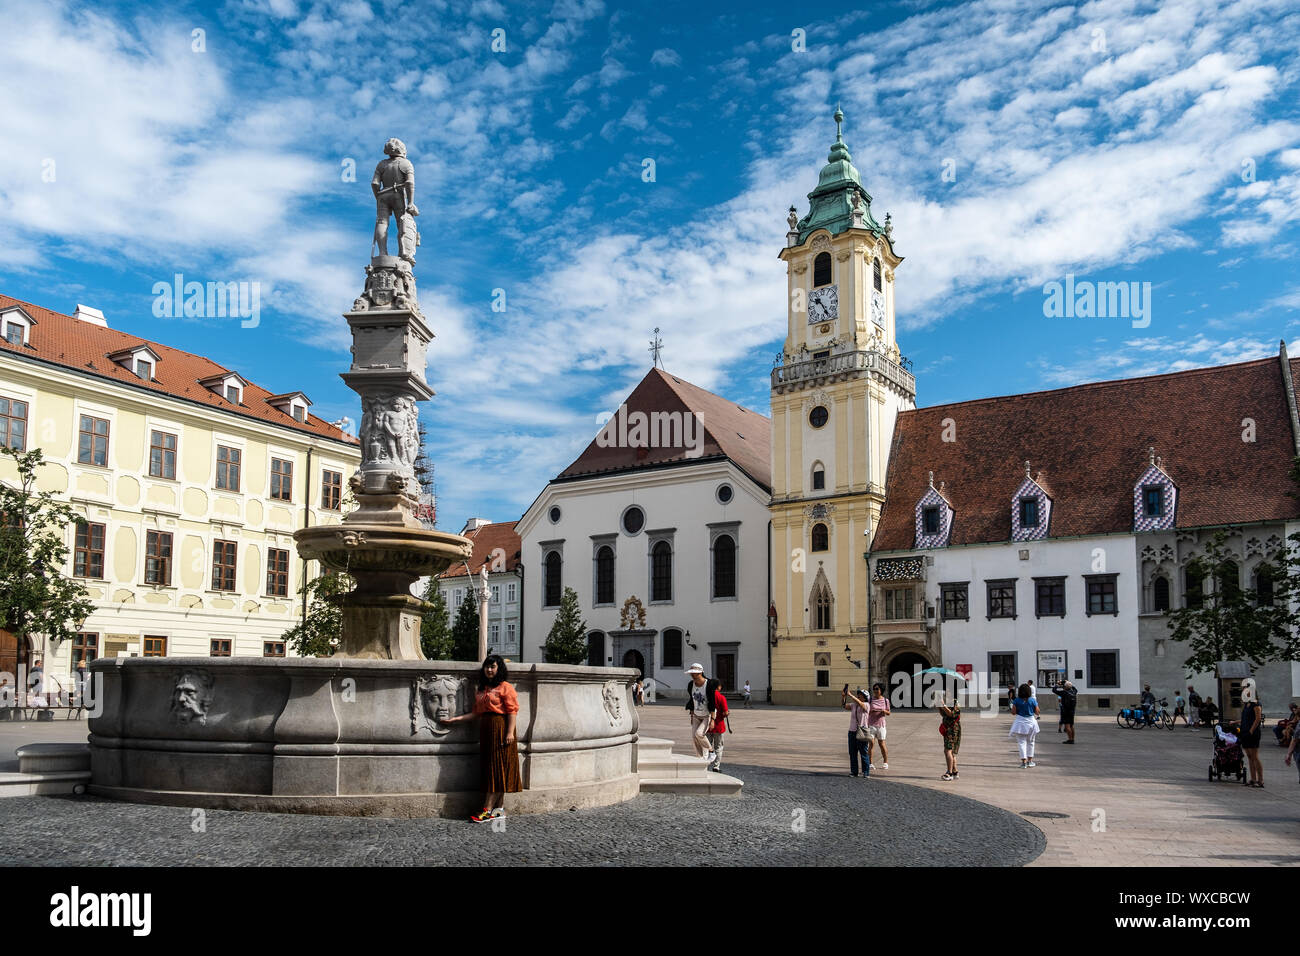 BRATISLAVA, SLOVAKIA - AUGUST 18, 2019: Old Town Hall  is a complex of buildings from the 14th century. It is the oldest city hall in the country Stock Photo